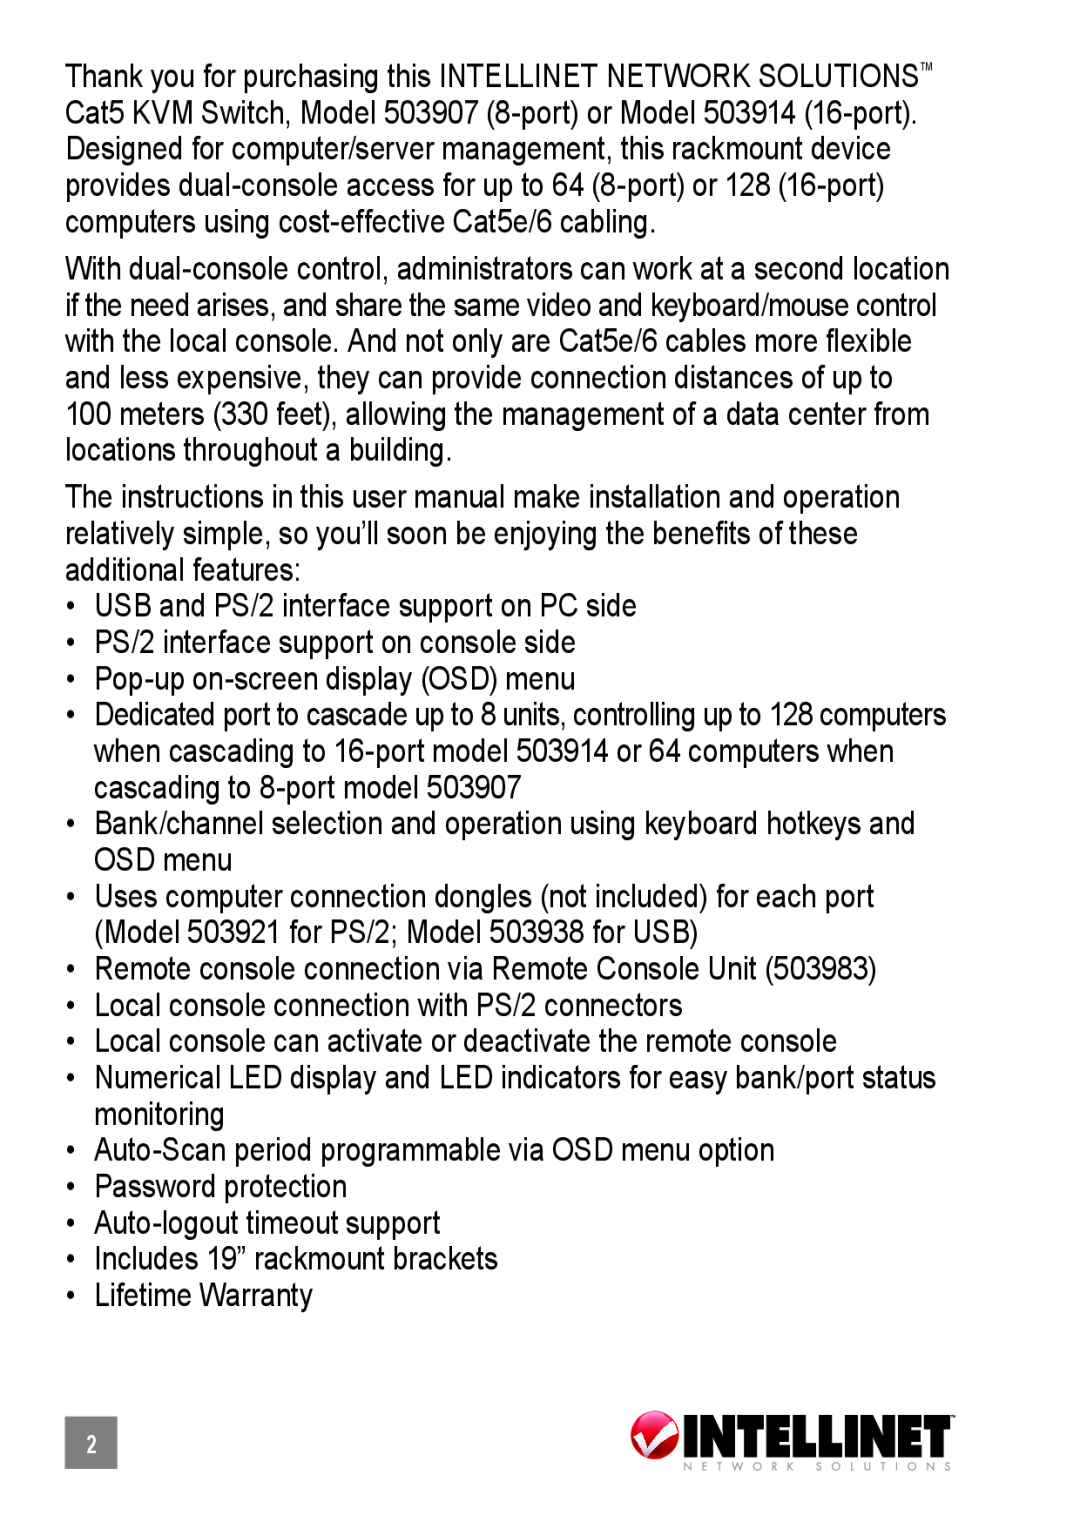 Intellinet Network Solutions 503907, 503914 user manual USB and PS/2 interface support on PC side 